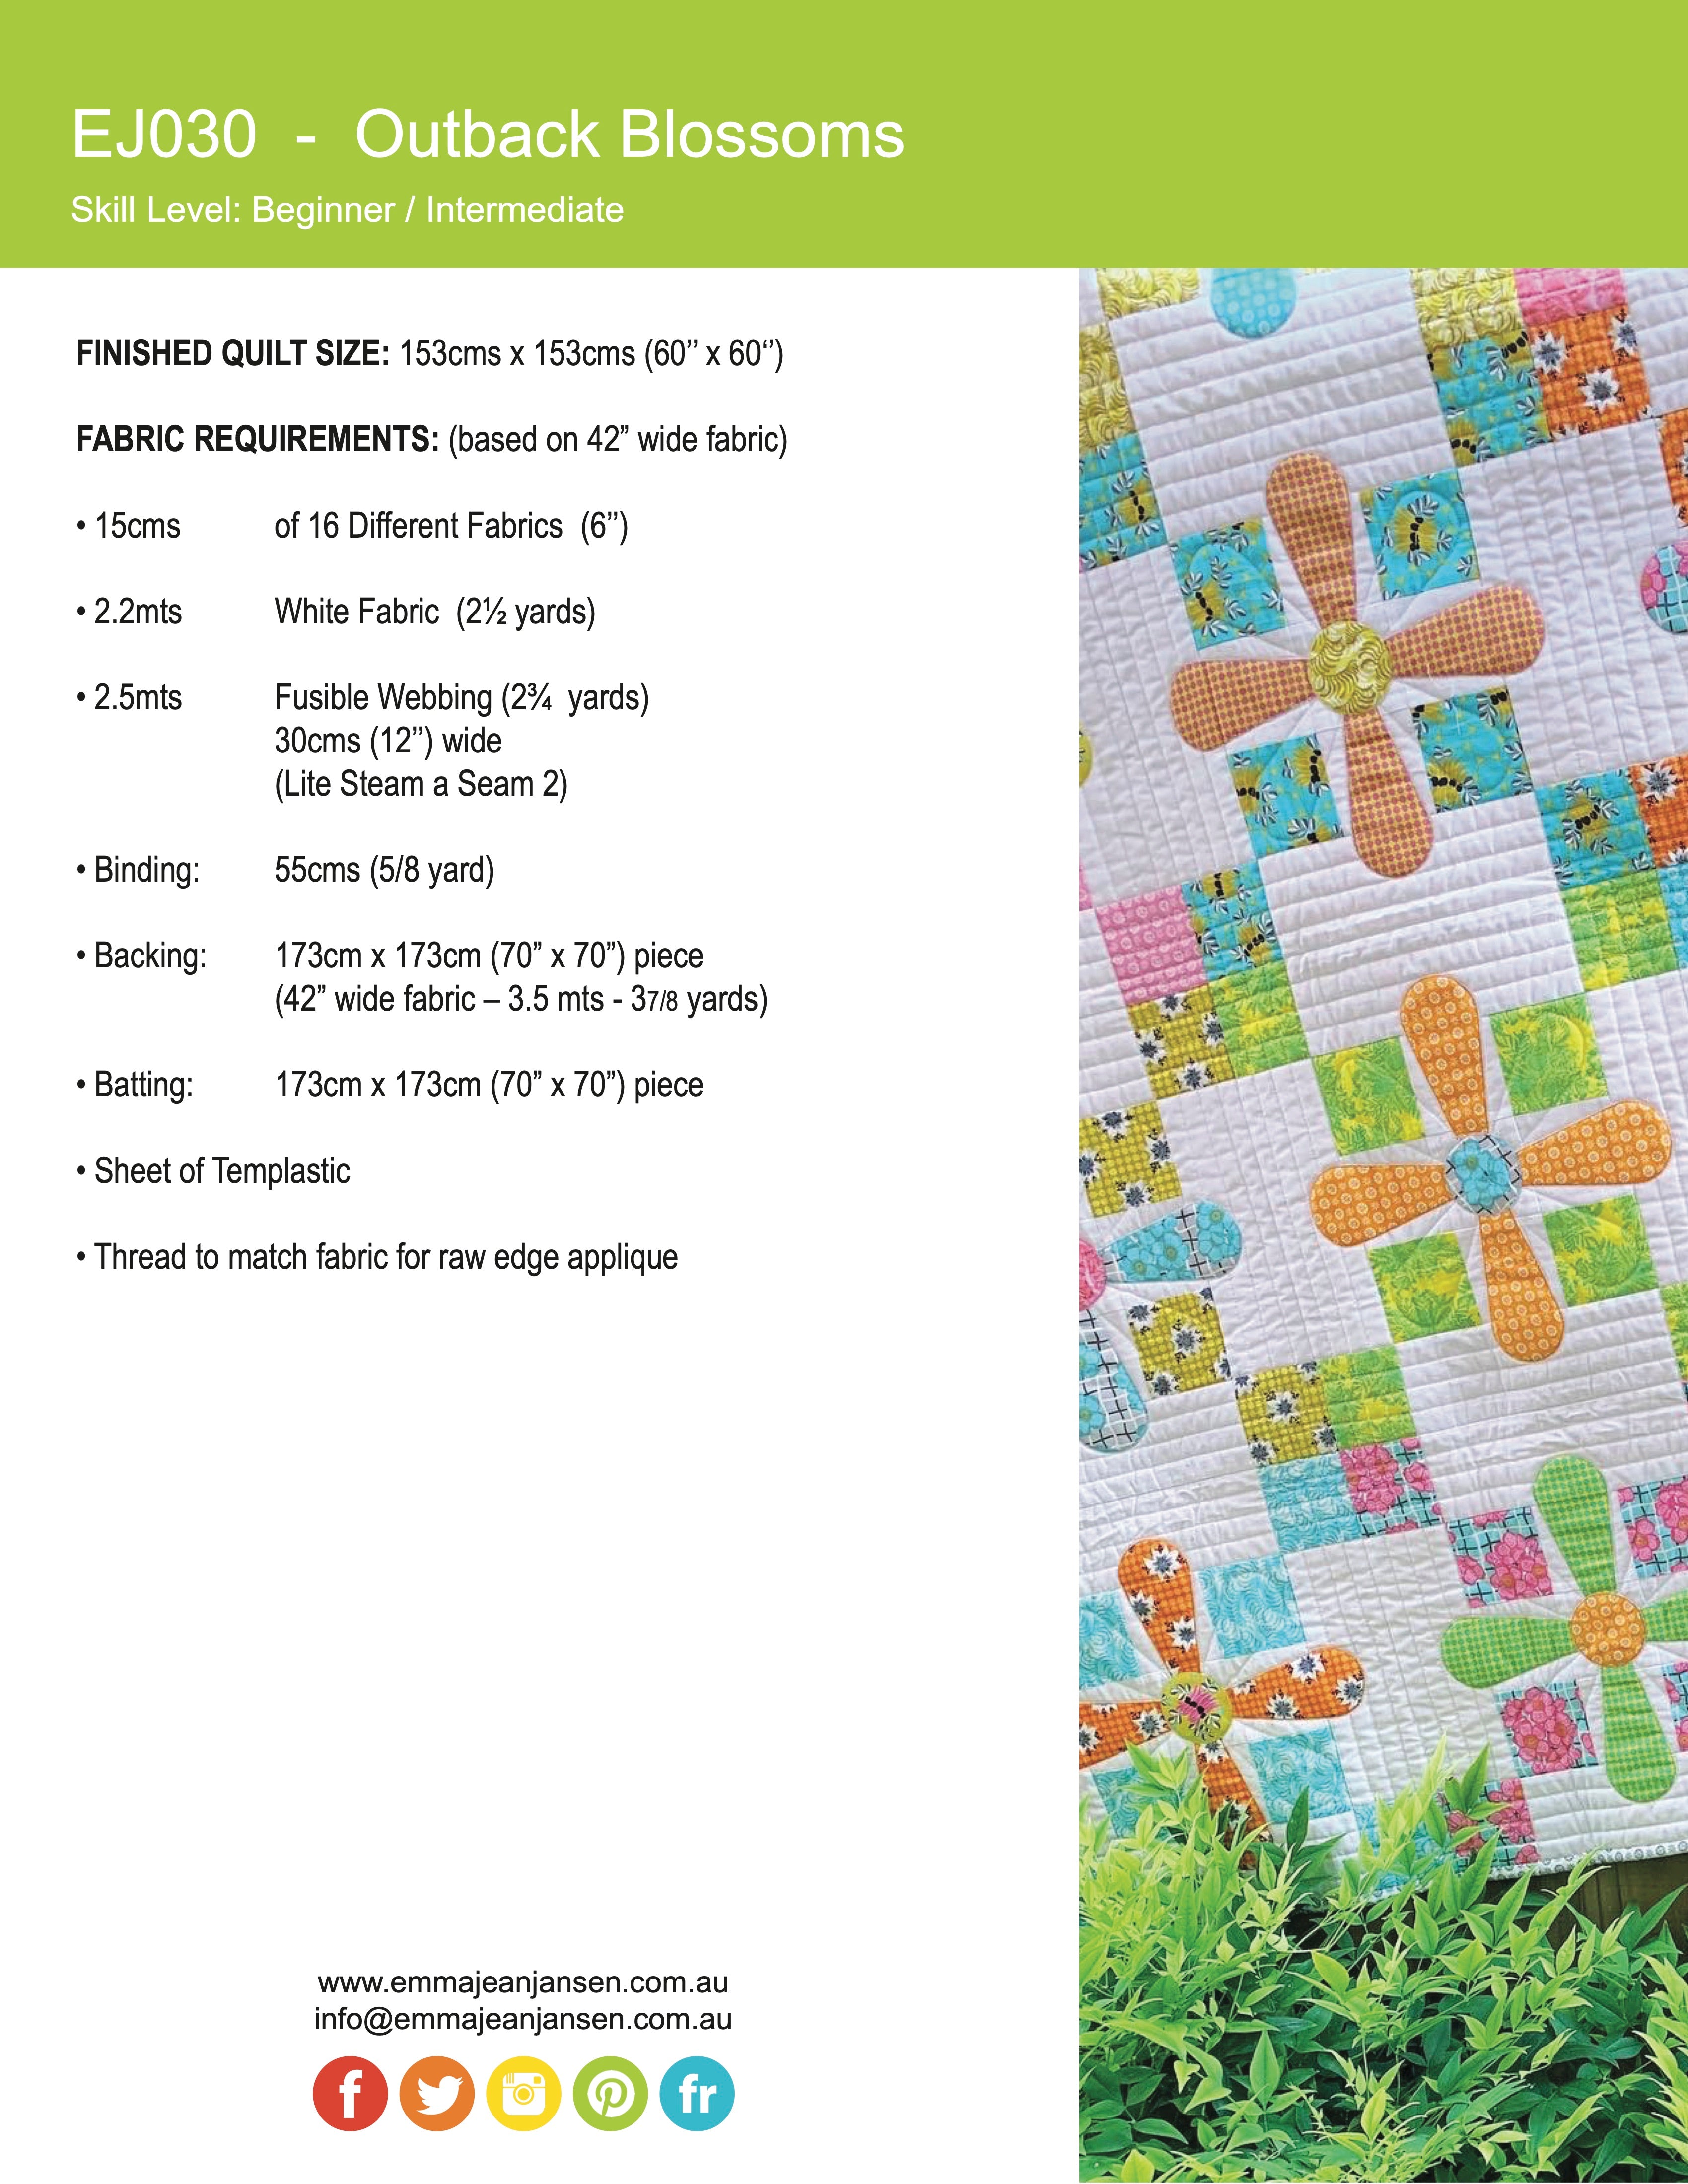 Outback Blossoms Quilt Pattern - PDF